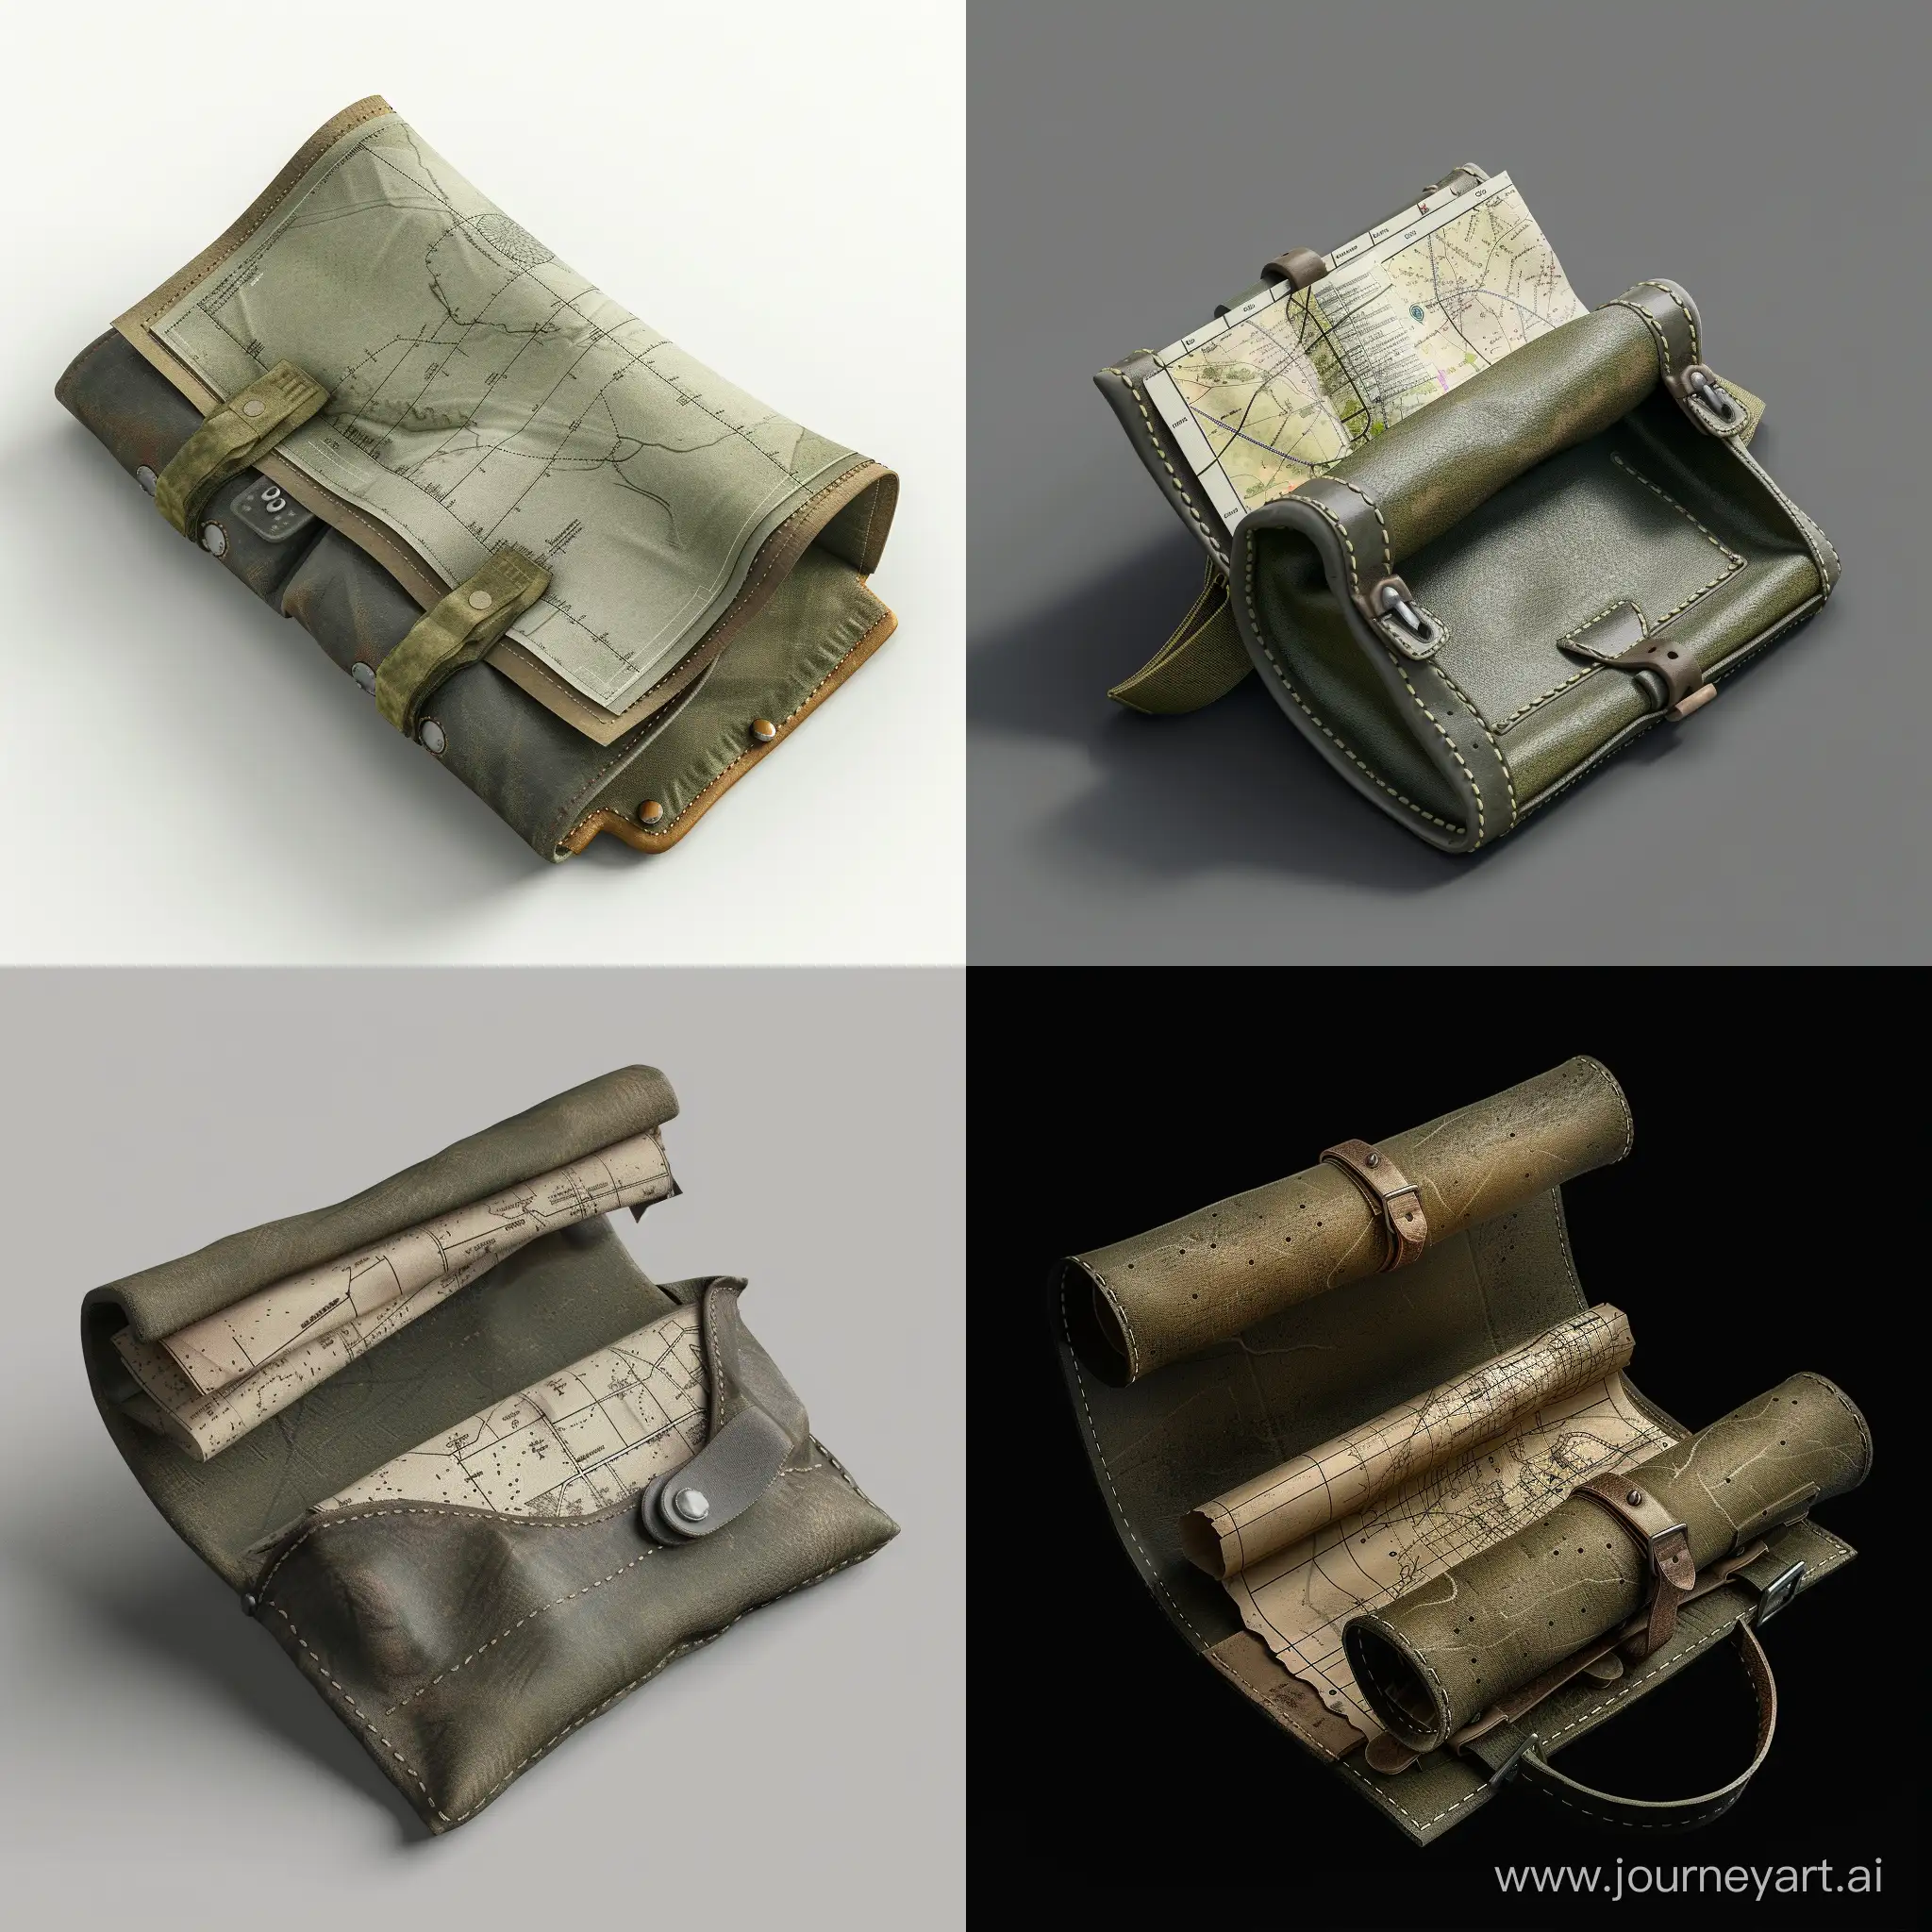 Isometric-Military-Mapping-in-Folded-Paper-Inside-Leather-Pouch-Realistic-3D-Render